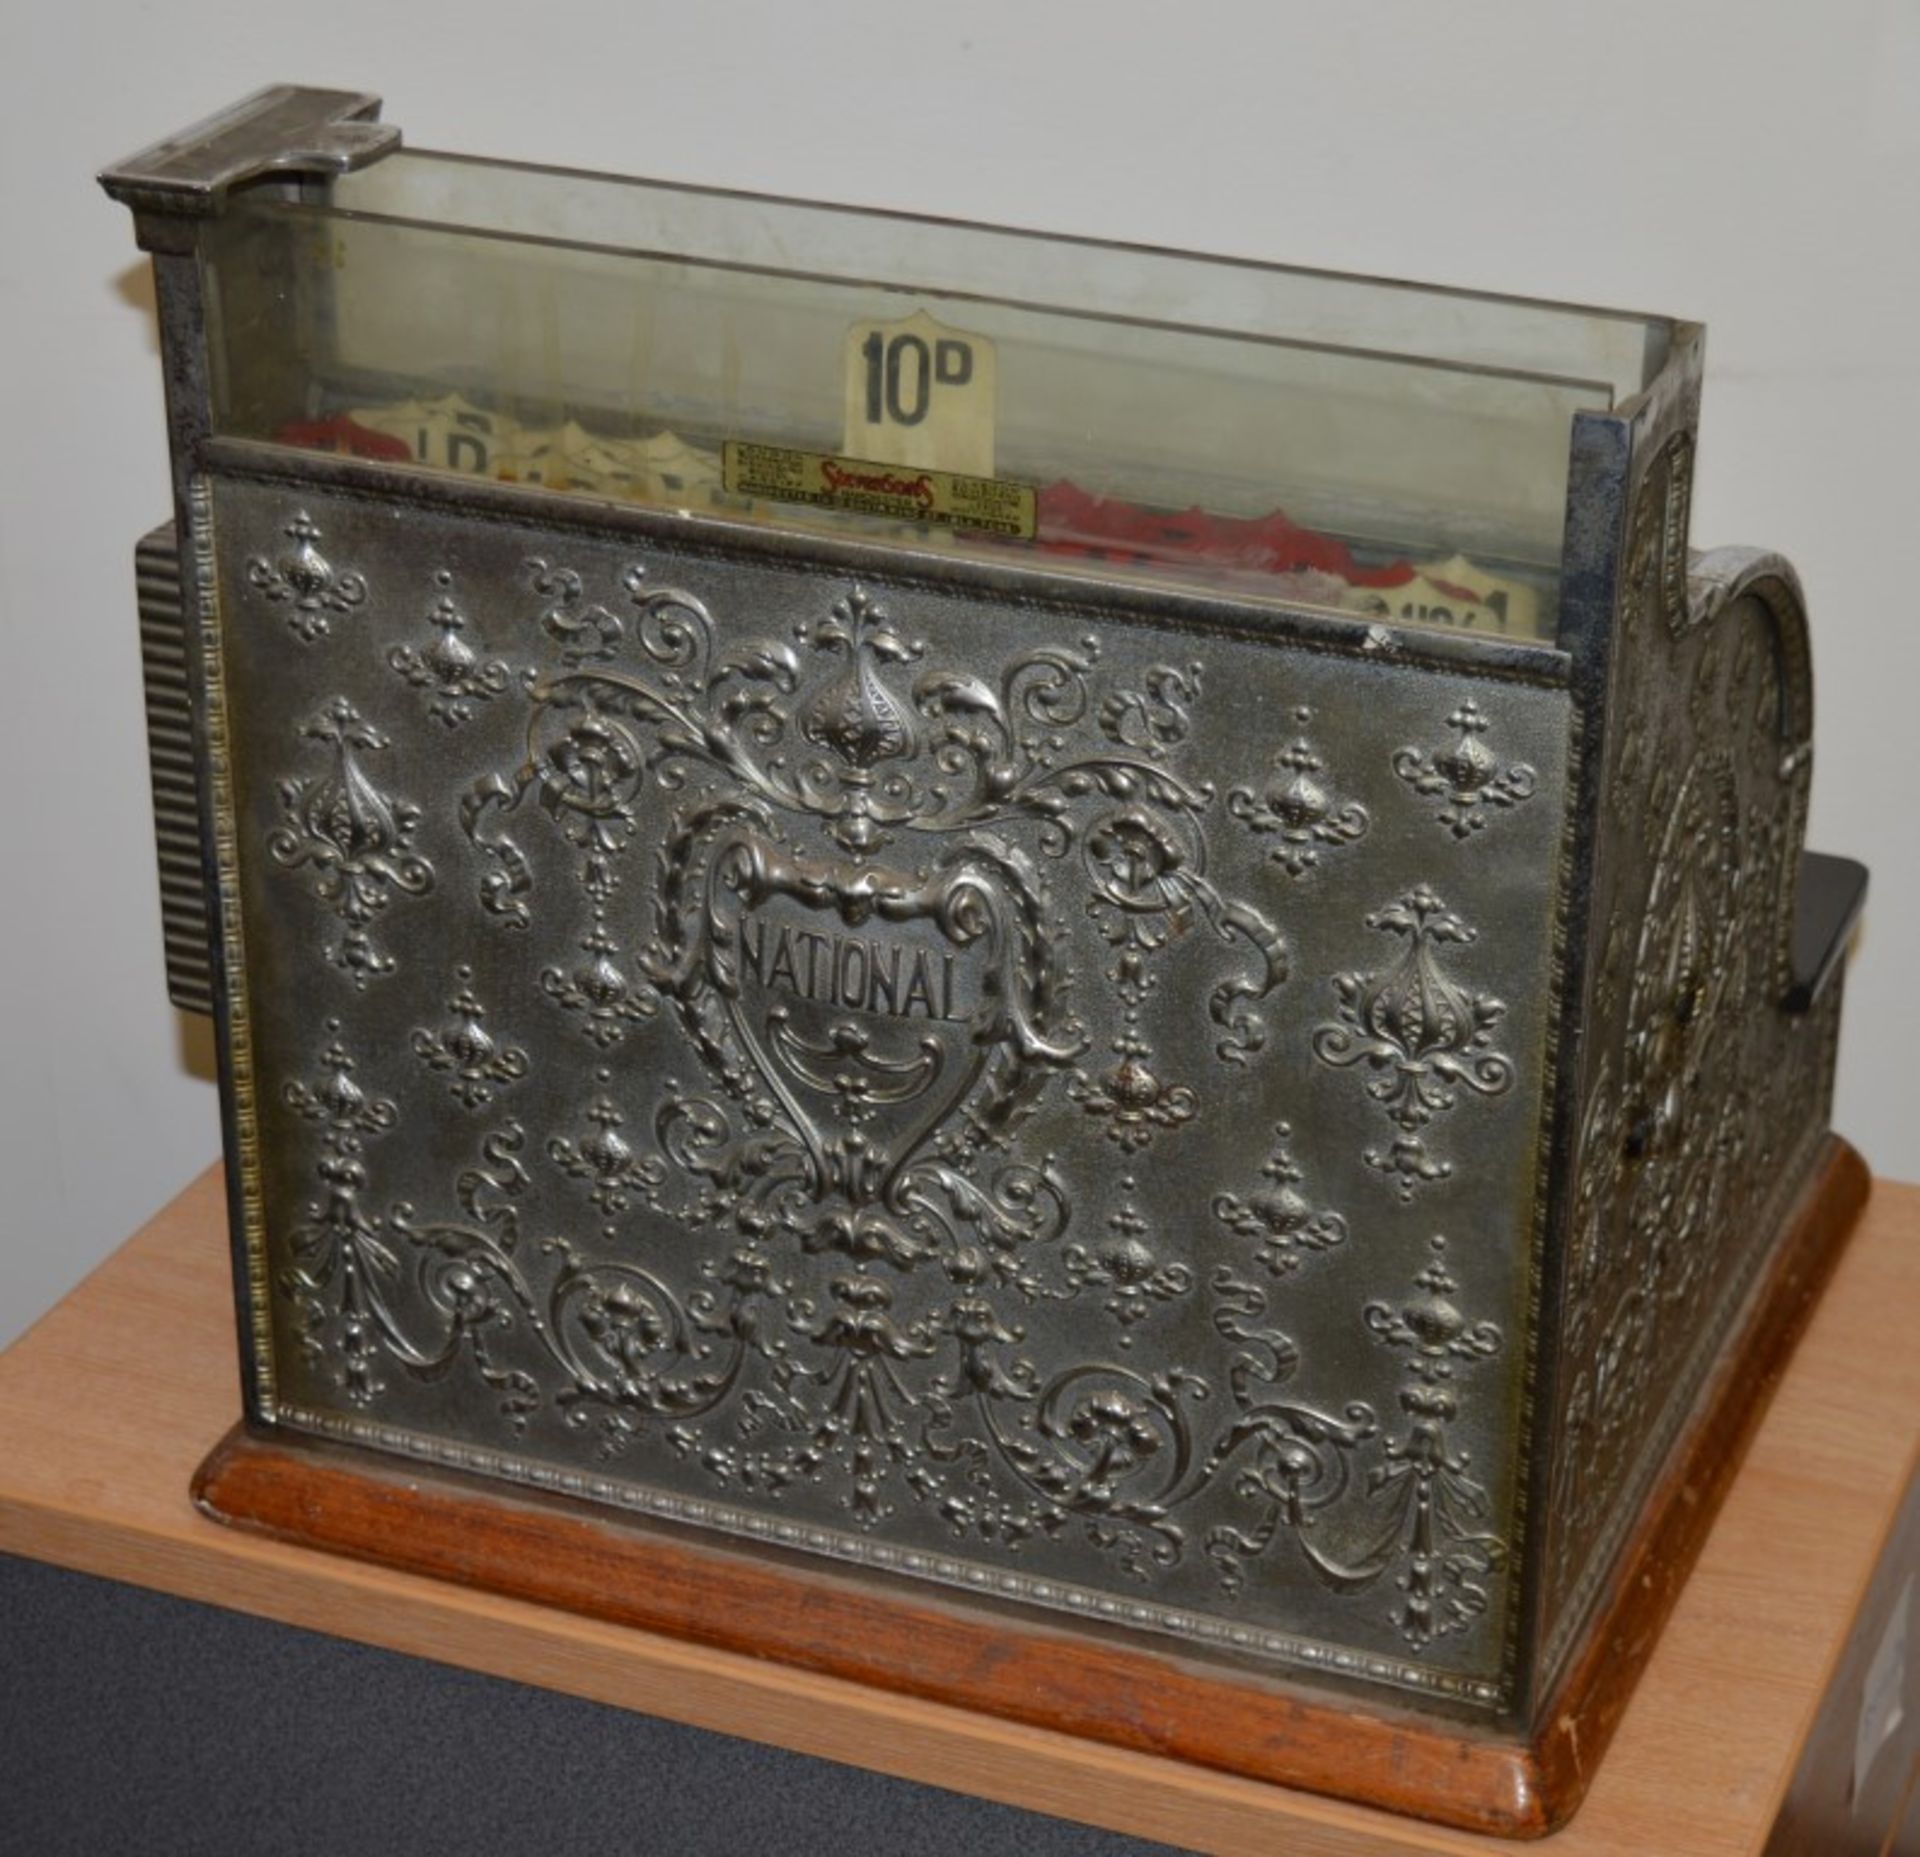 1 x Exquisite Antique National Cash Register - Circa Early 1900's - Perfect For Barbers Shop, Tattoo - Image 27 of 35